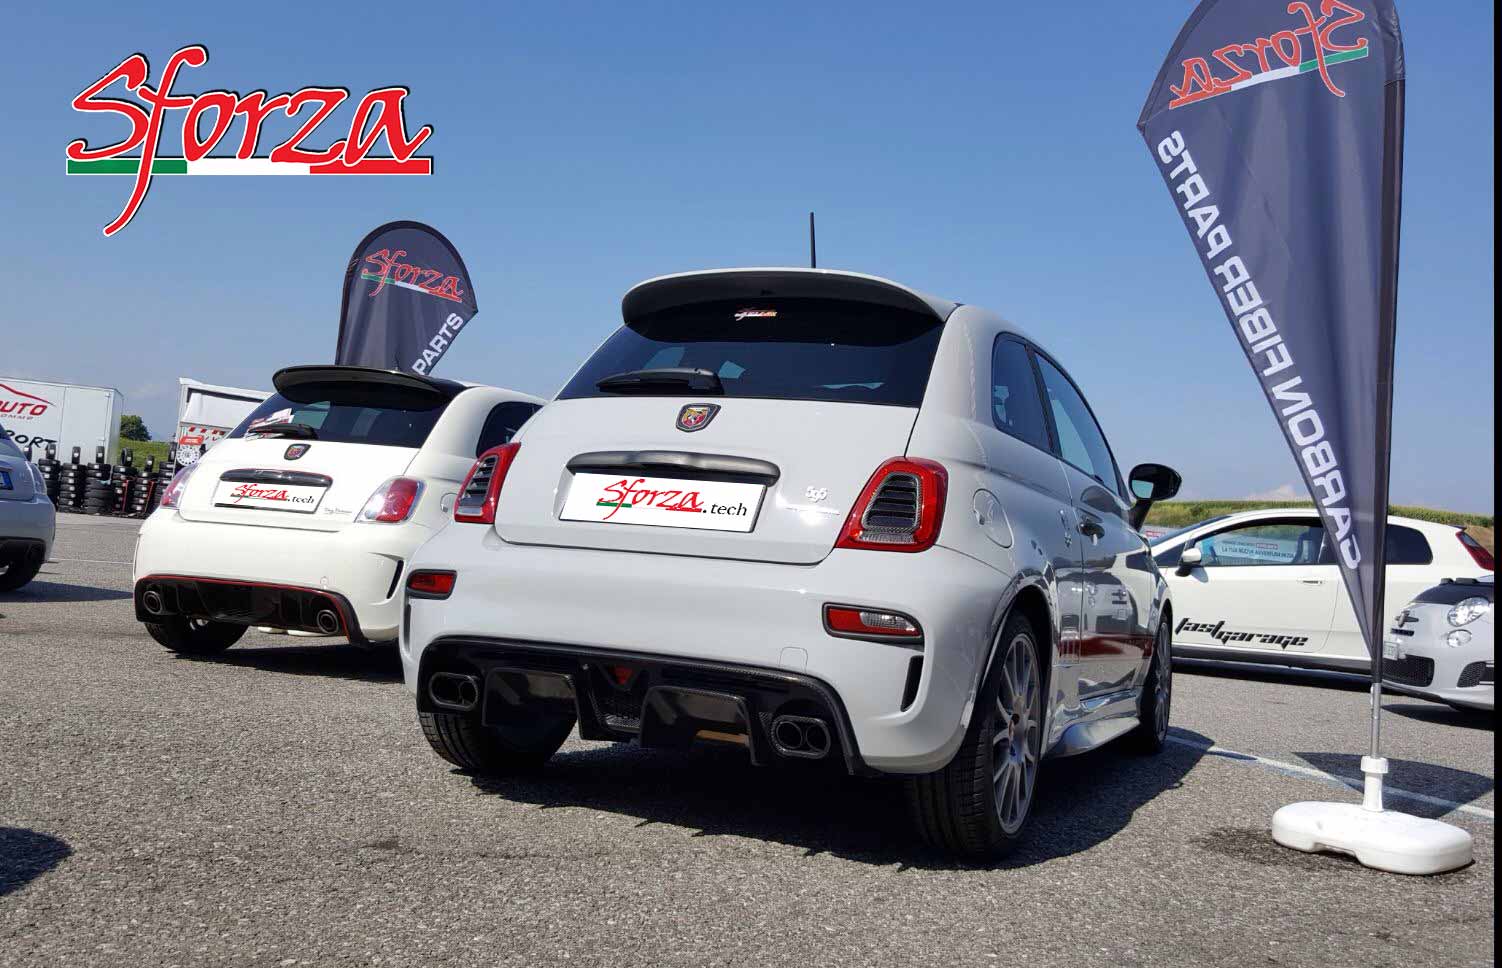 Only Abarth and Show Sforza Paddock